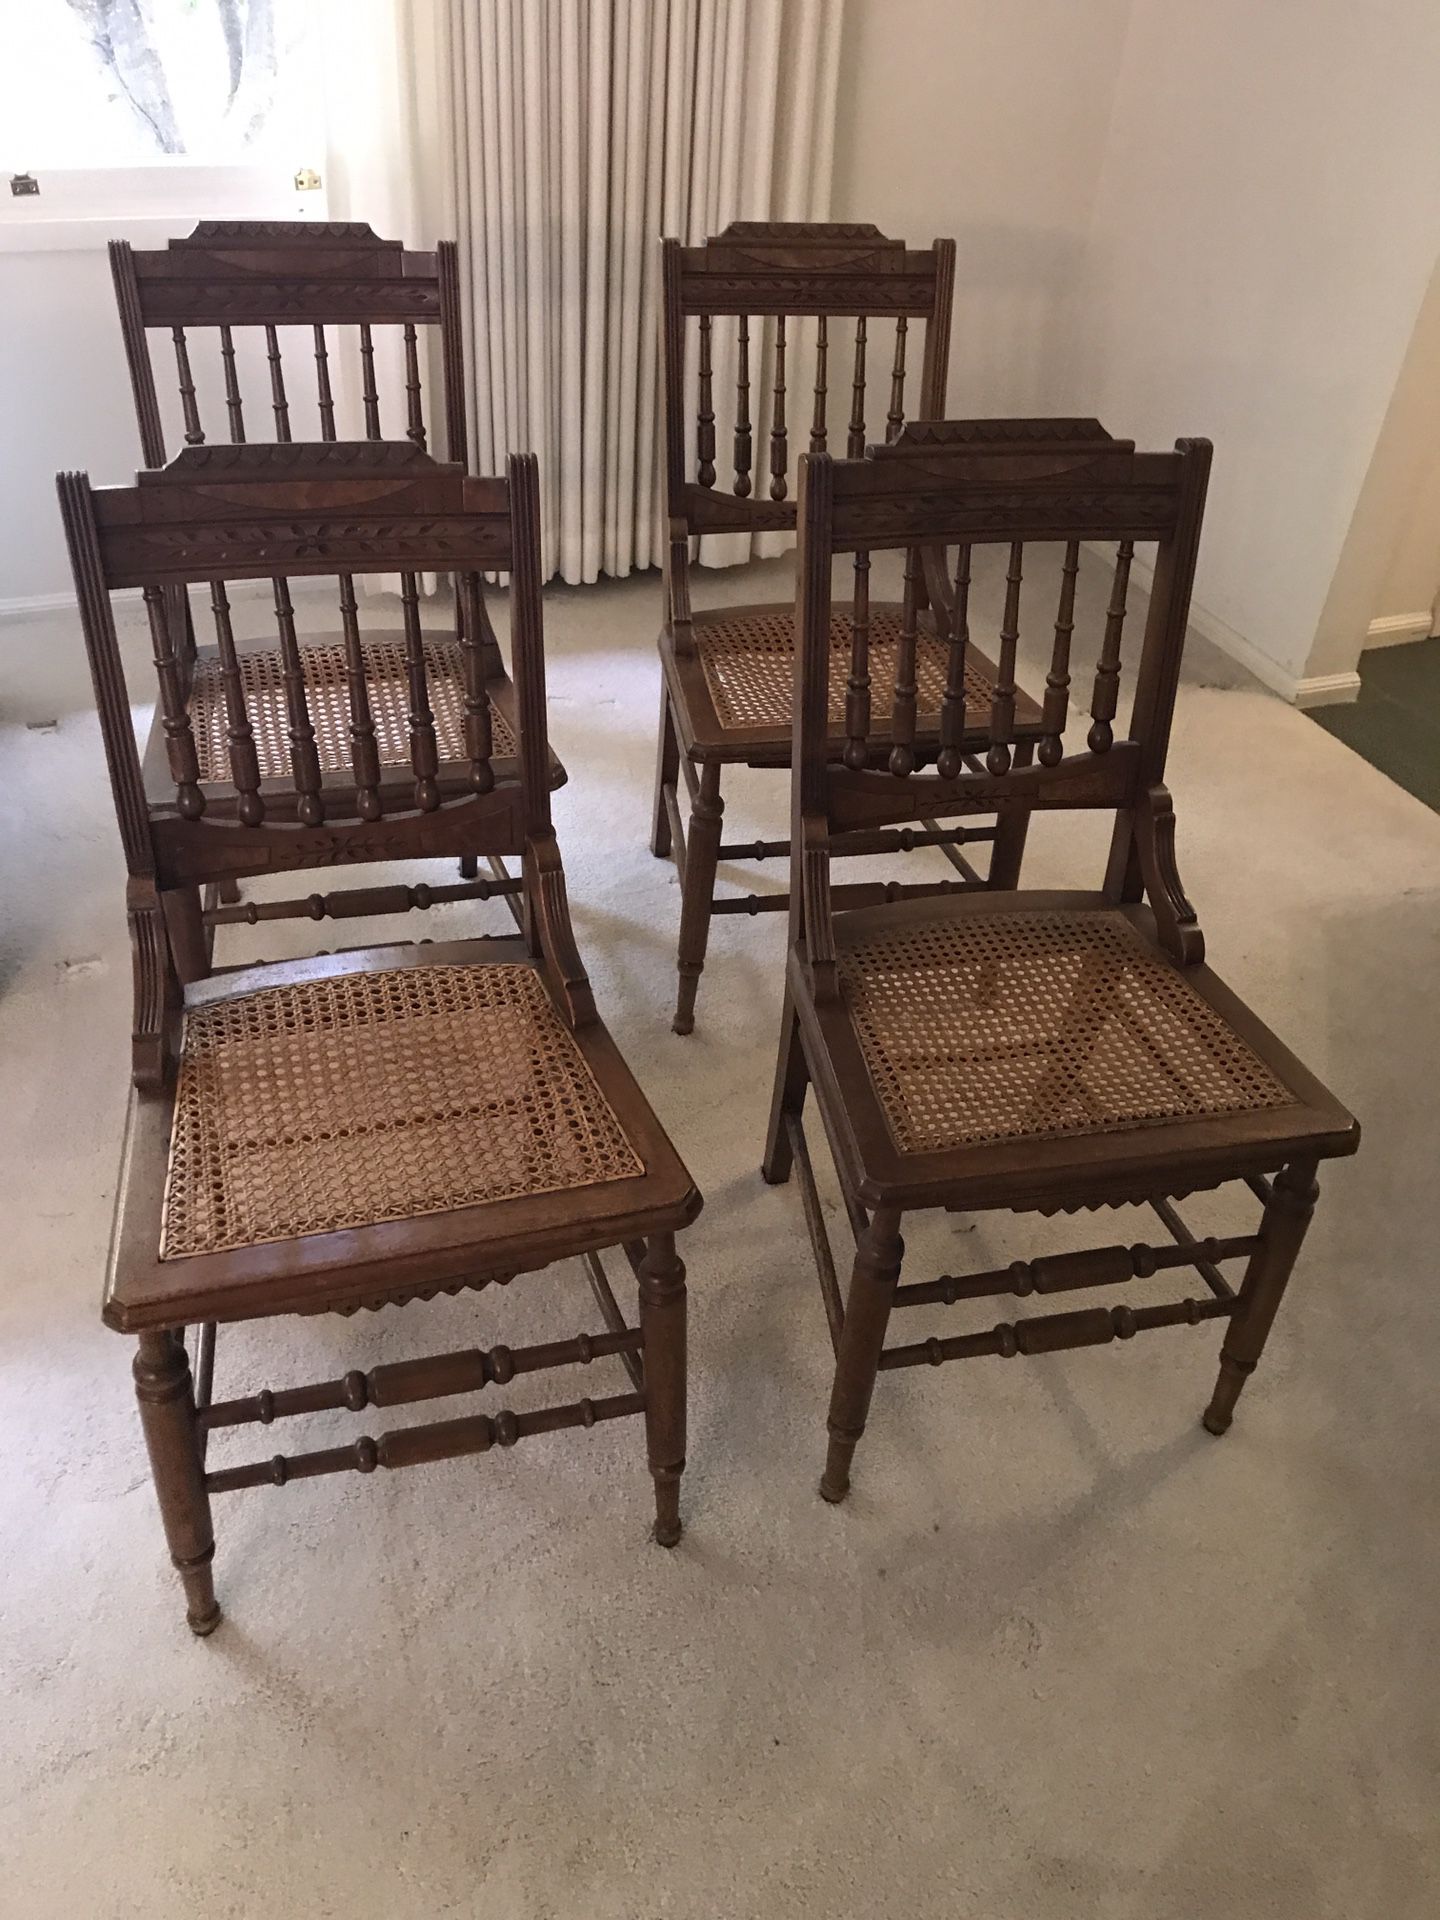 Woven Cane Chairs (set of 4)